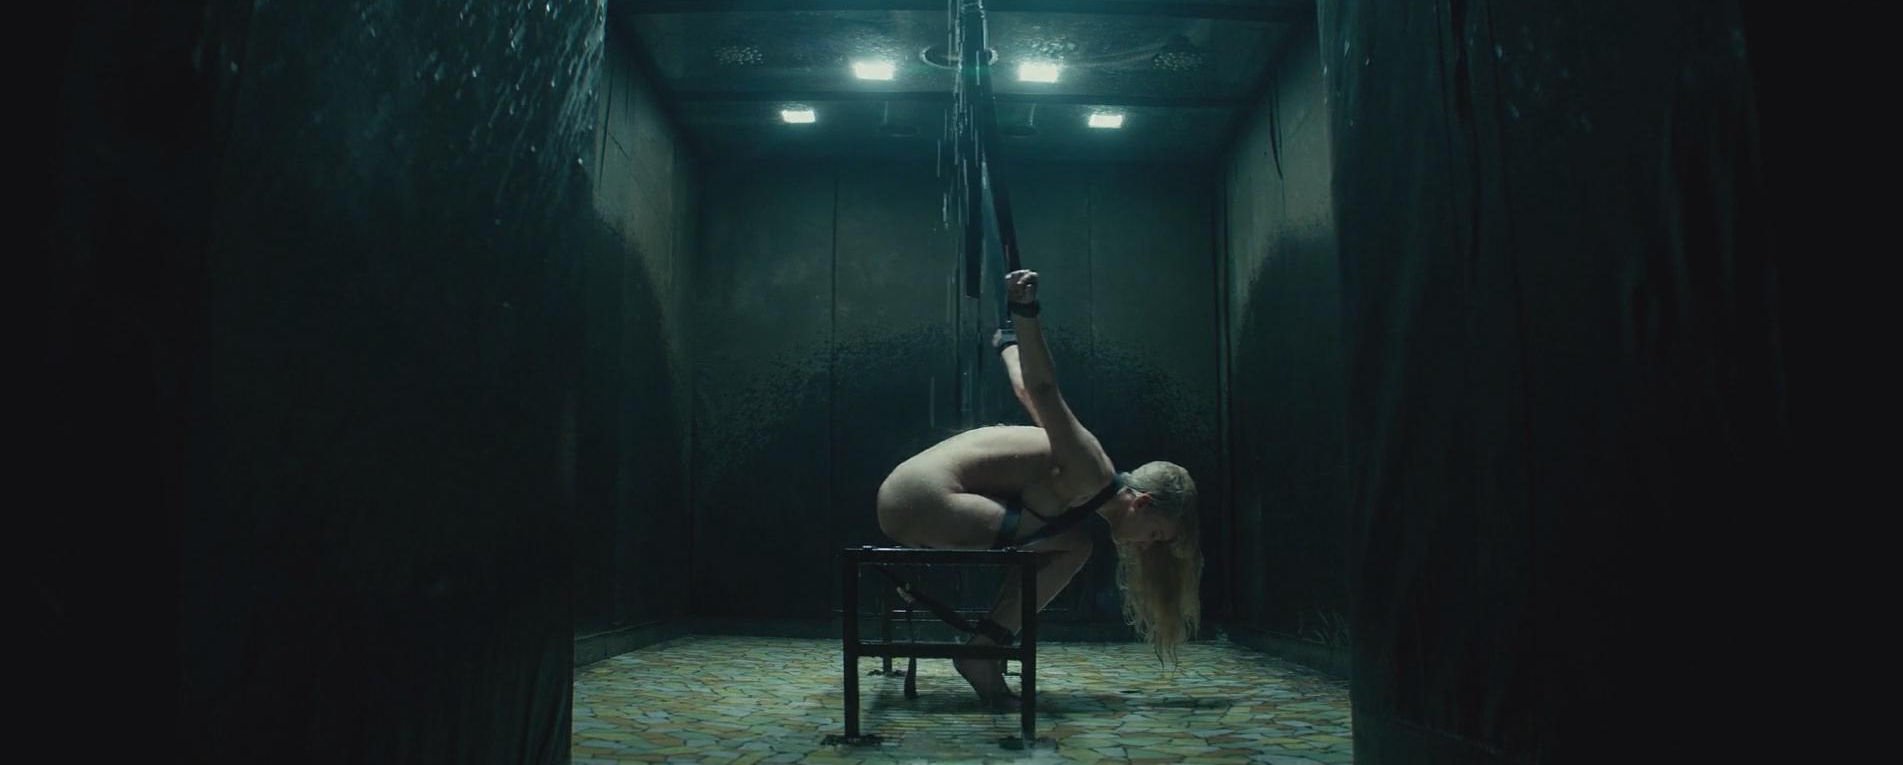 Jennifer Lawrence Nude - Red Sparrow (2018) HD 1080p